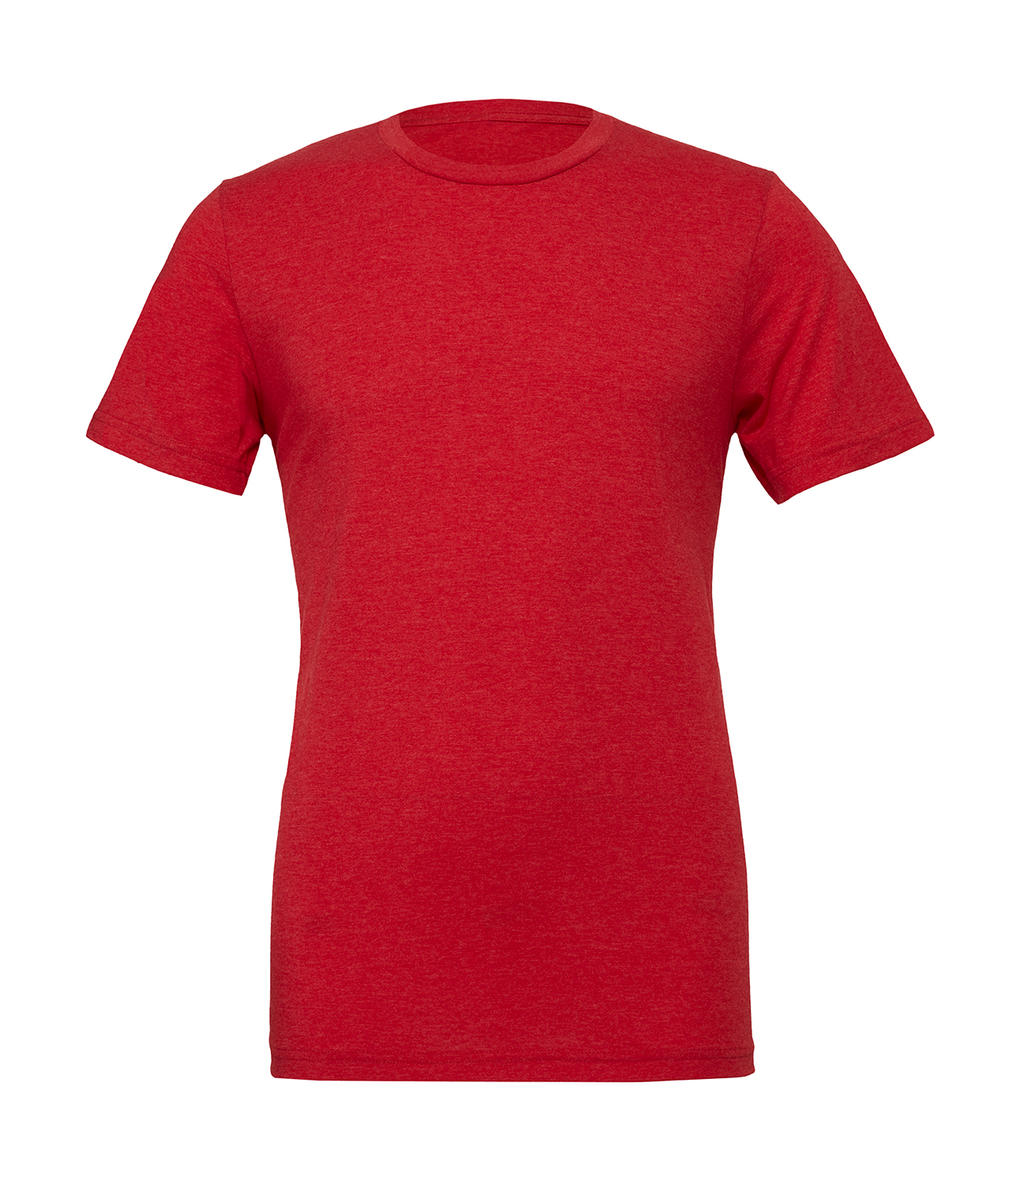  Unisex Triblend Short Sleeve Tee in Farbe Red Triblend